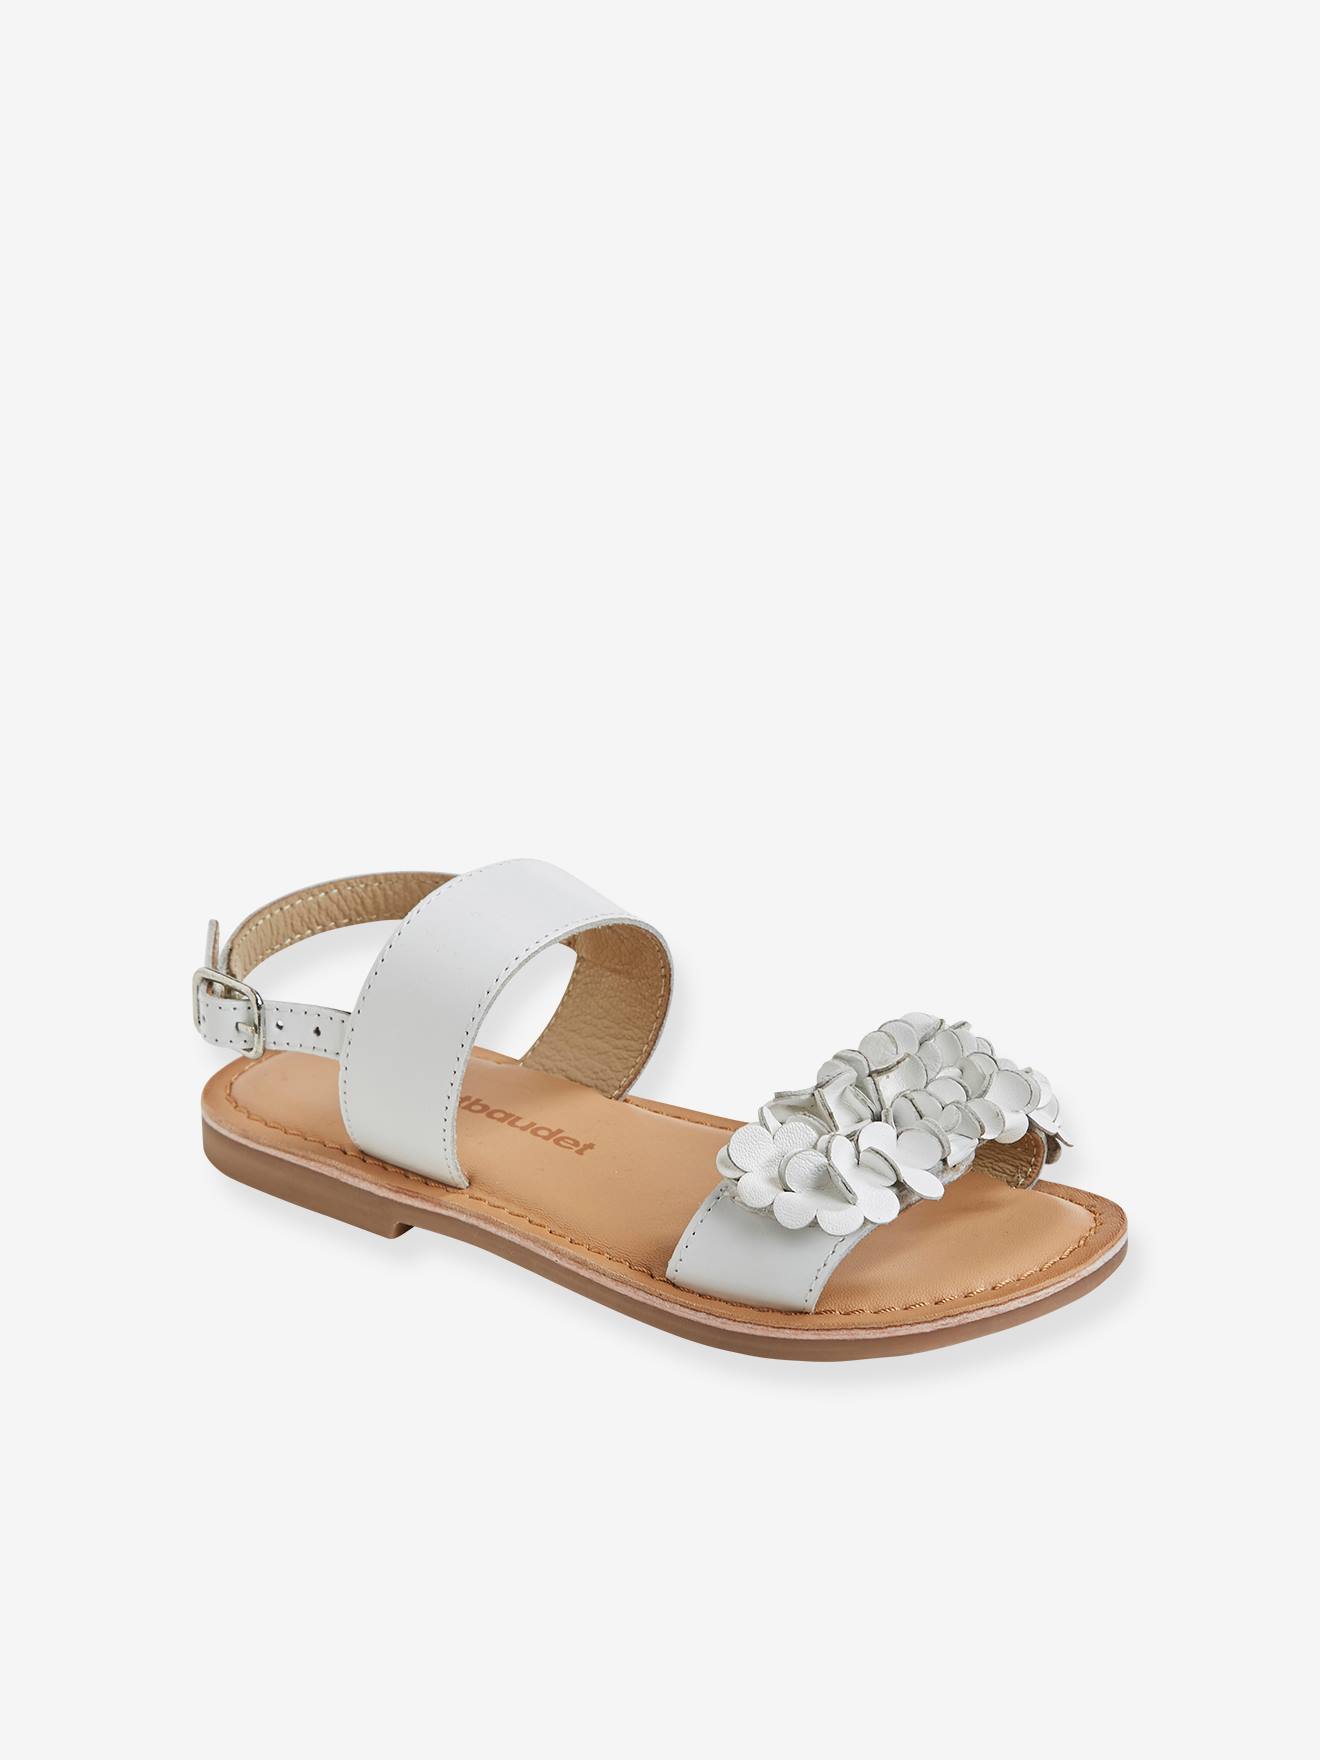 Leather Sandals for Girls - white, Shoes